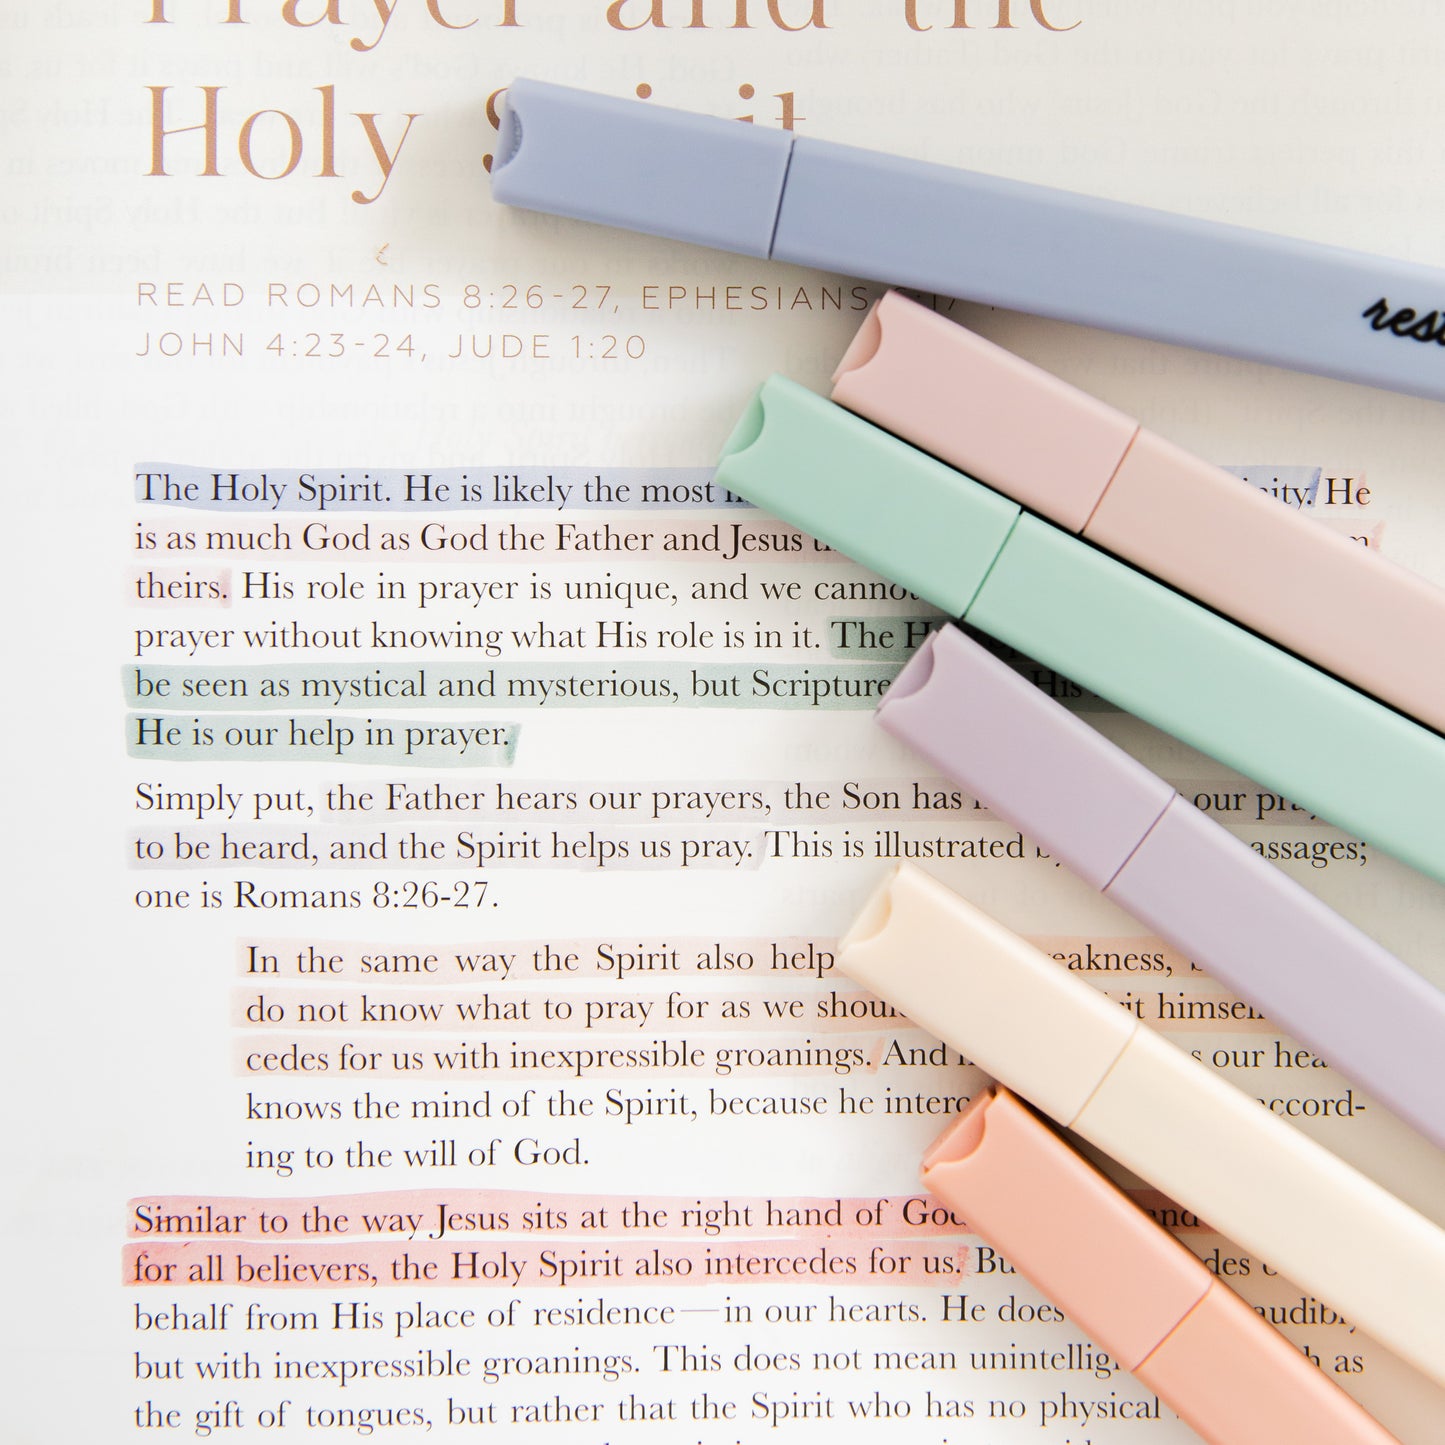 Which do you think will end up on top? Mr. Pen, Daily Grace Co, or Div, highlighter